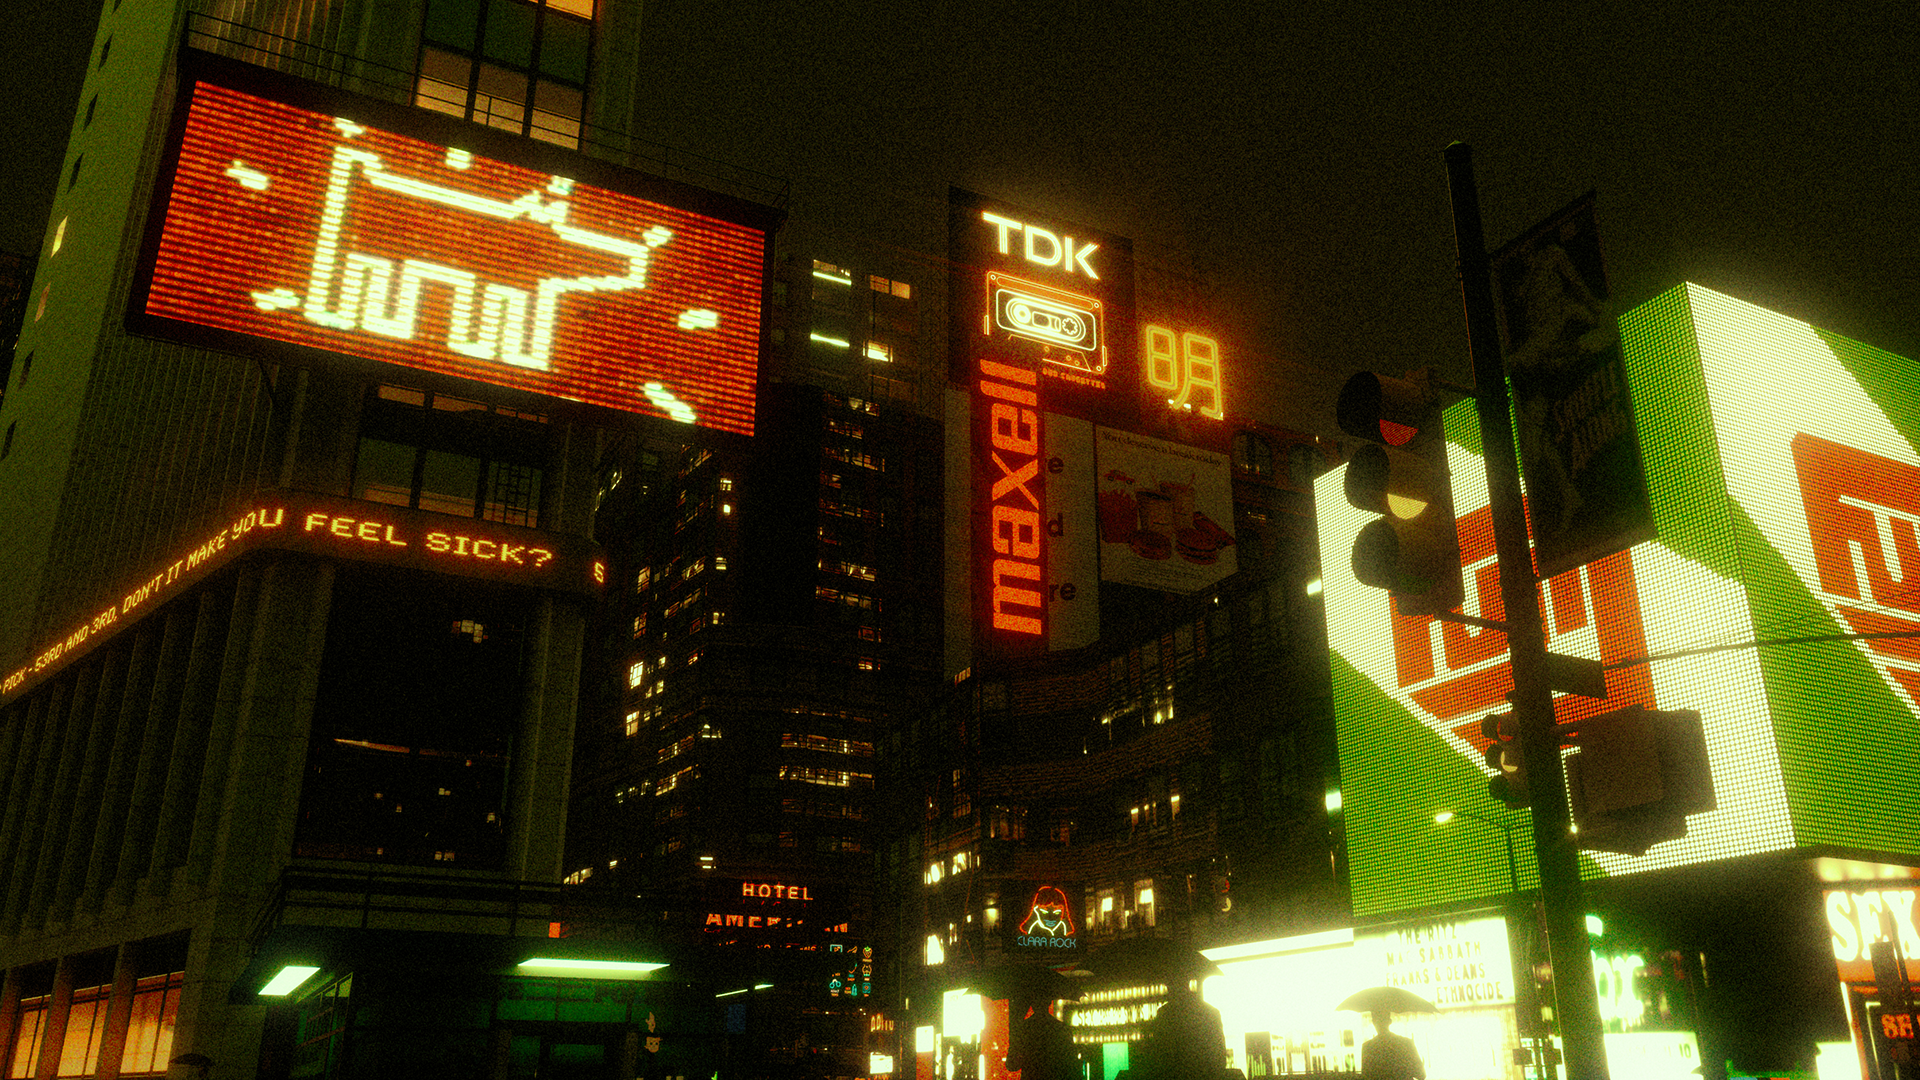 BBC-TimeSquare-80s_0007-1103190341-WIP2-_DeMain_1045.png